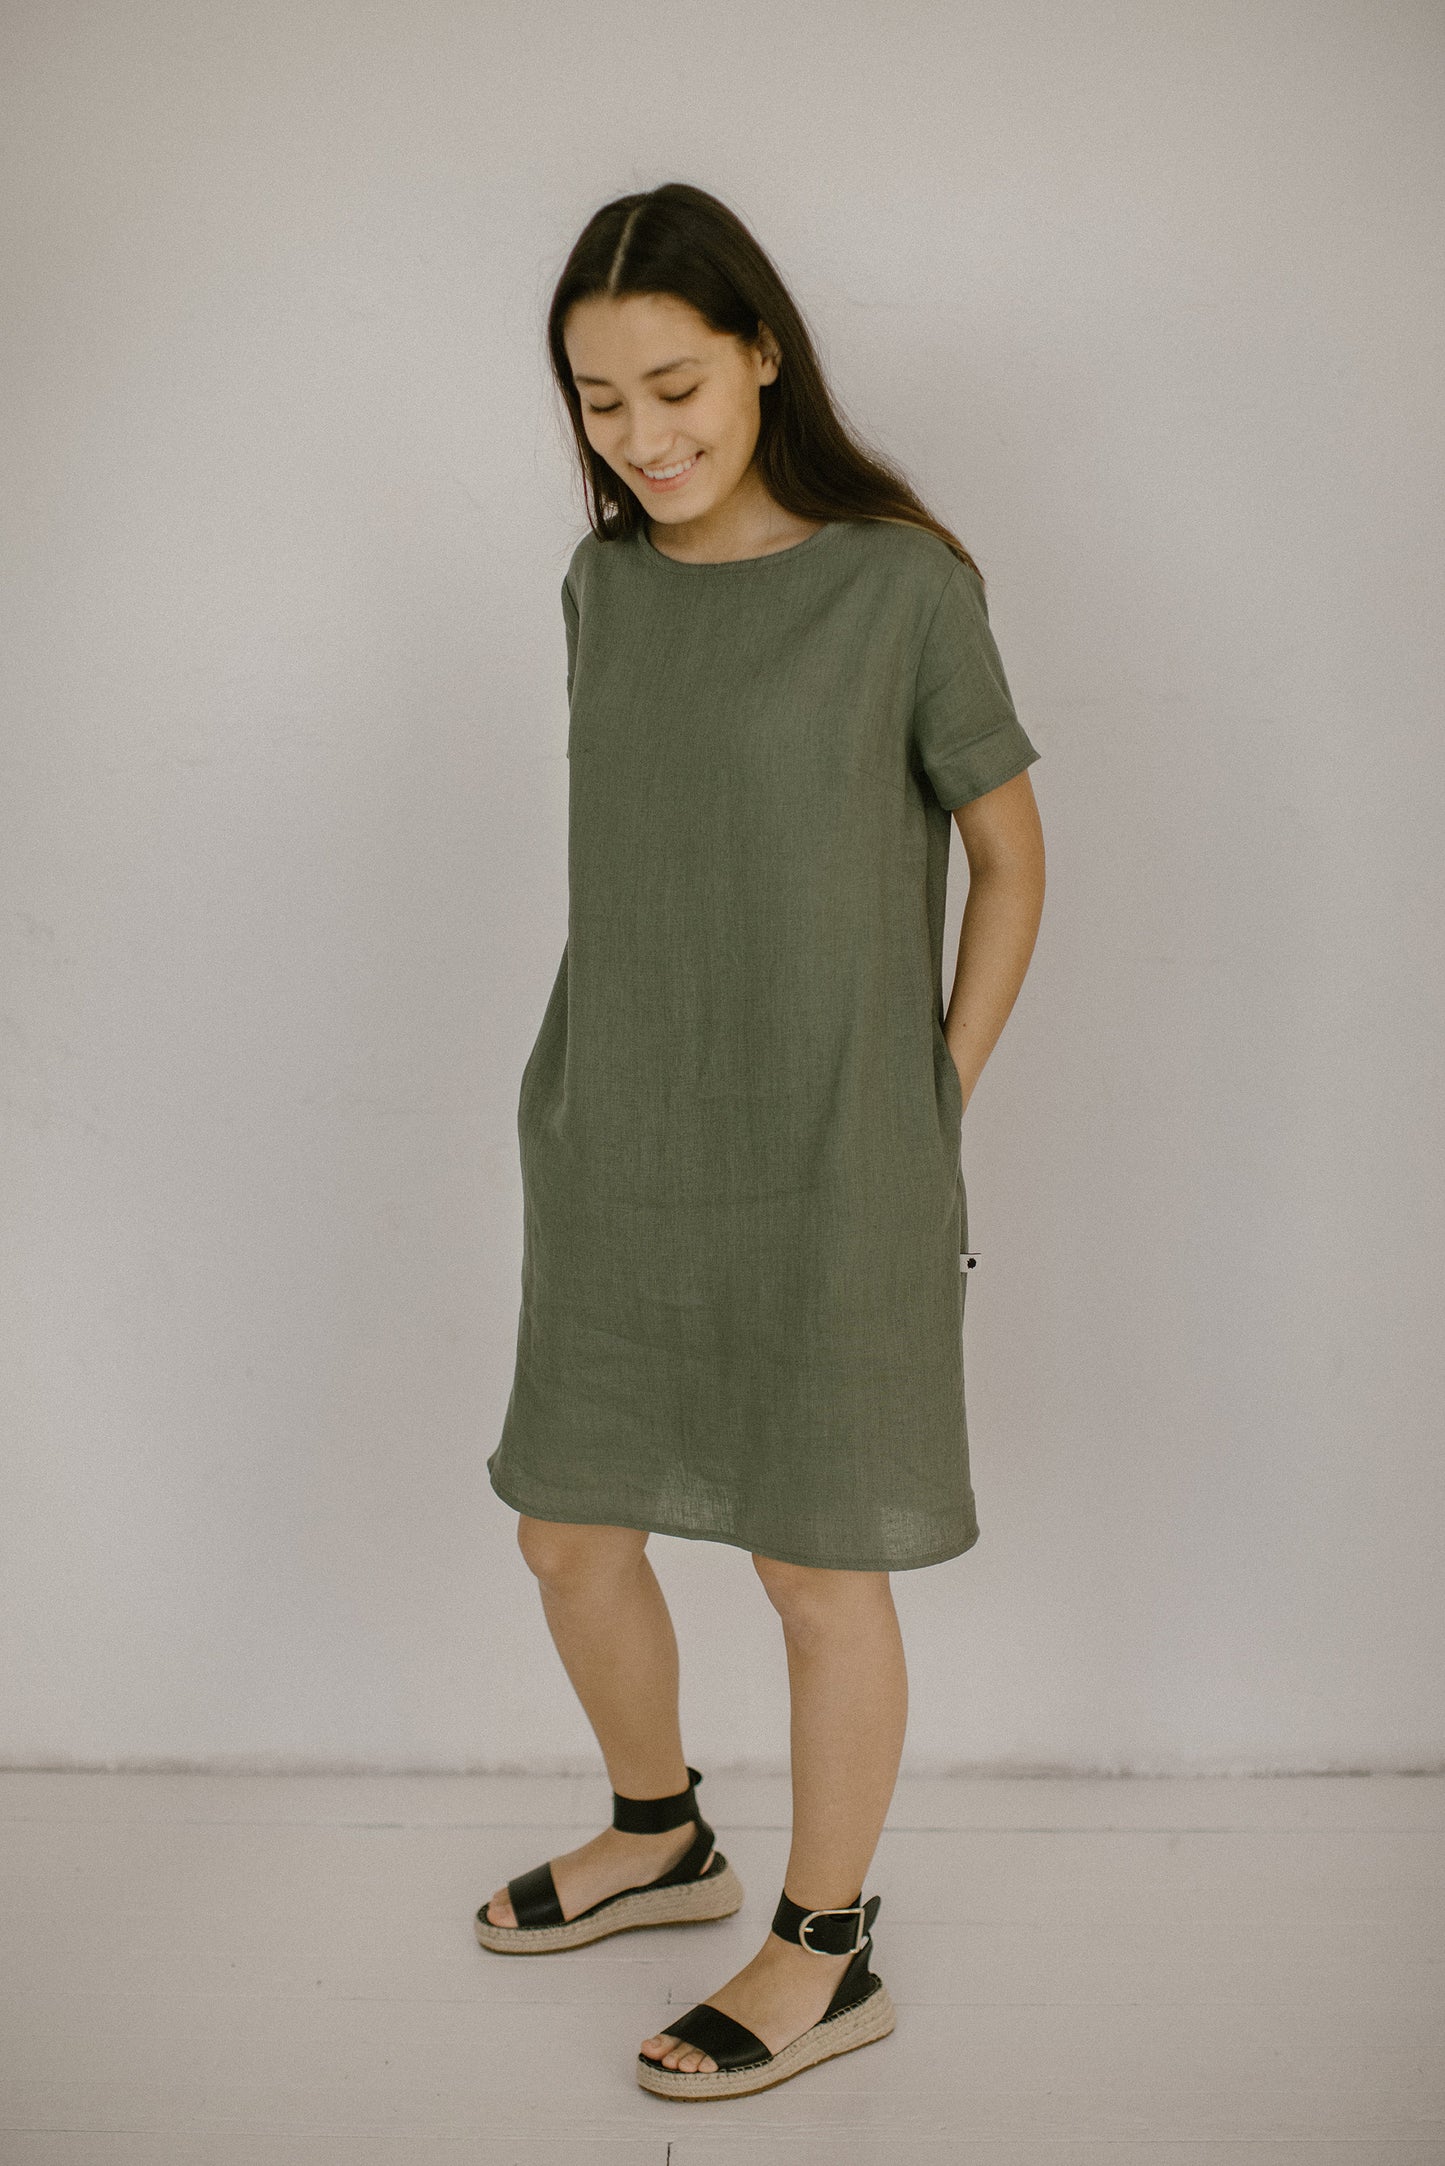 Oversized simple linen dress for summer ALISA, size 34/READY TO SHIP